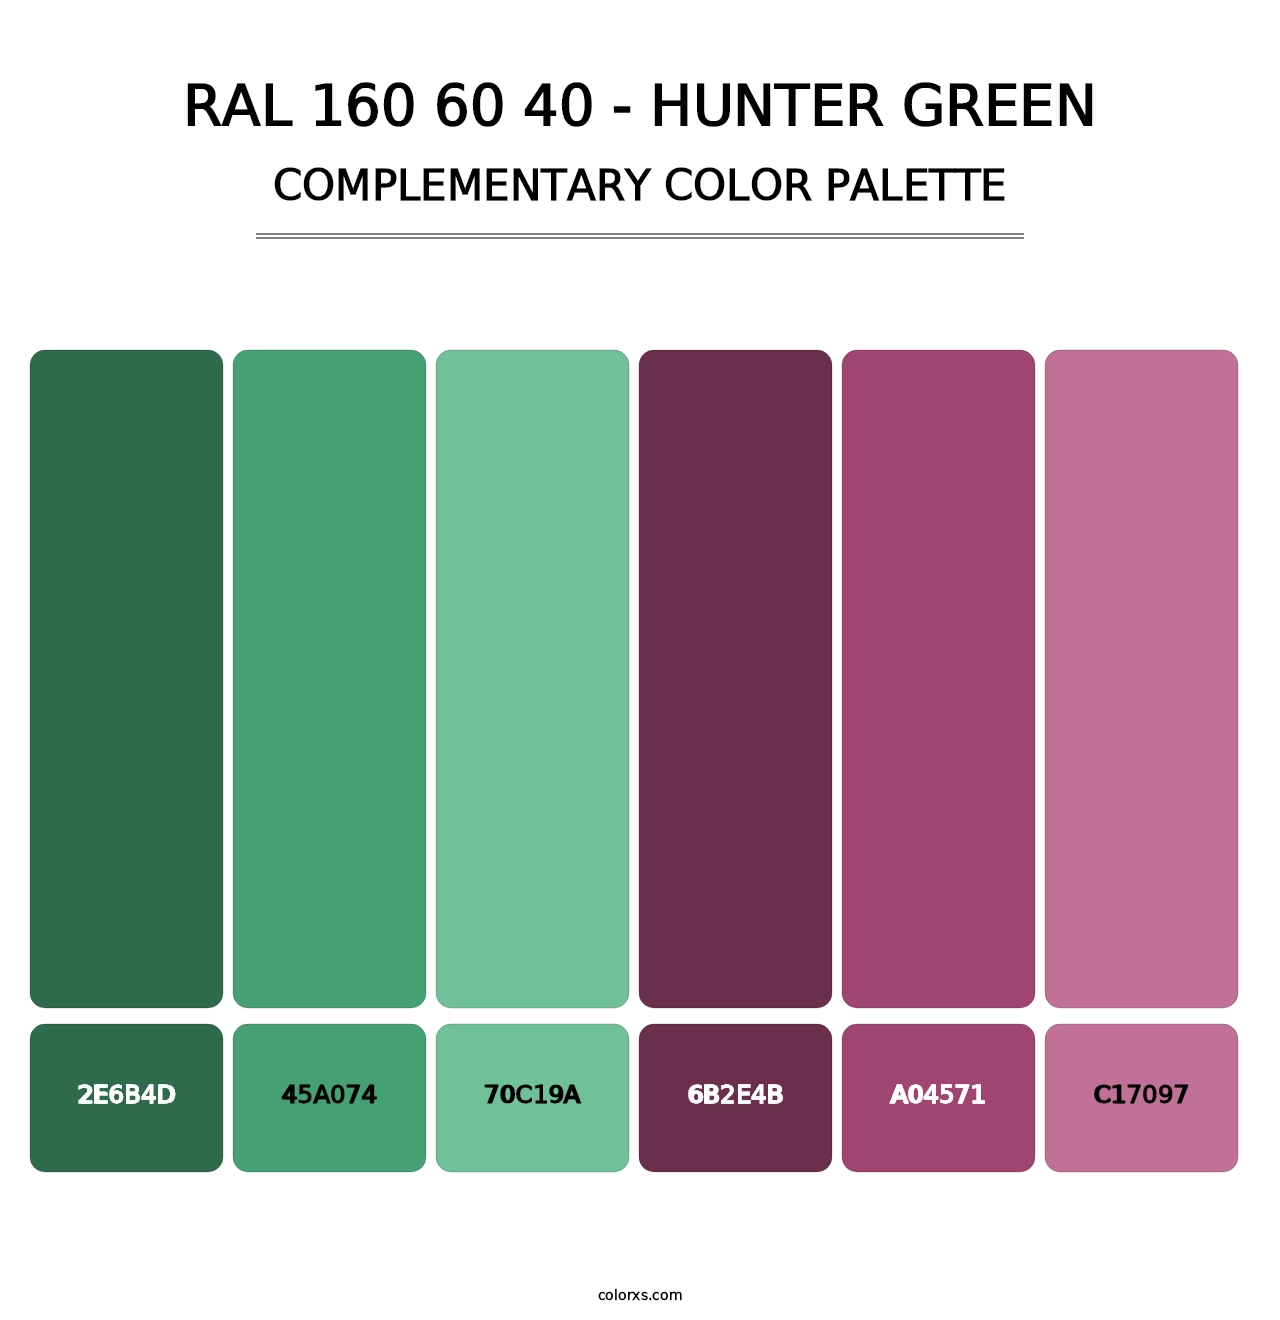 RAL 160 60 40 - Hunter Green - Complementary Color Palette